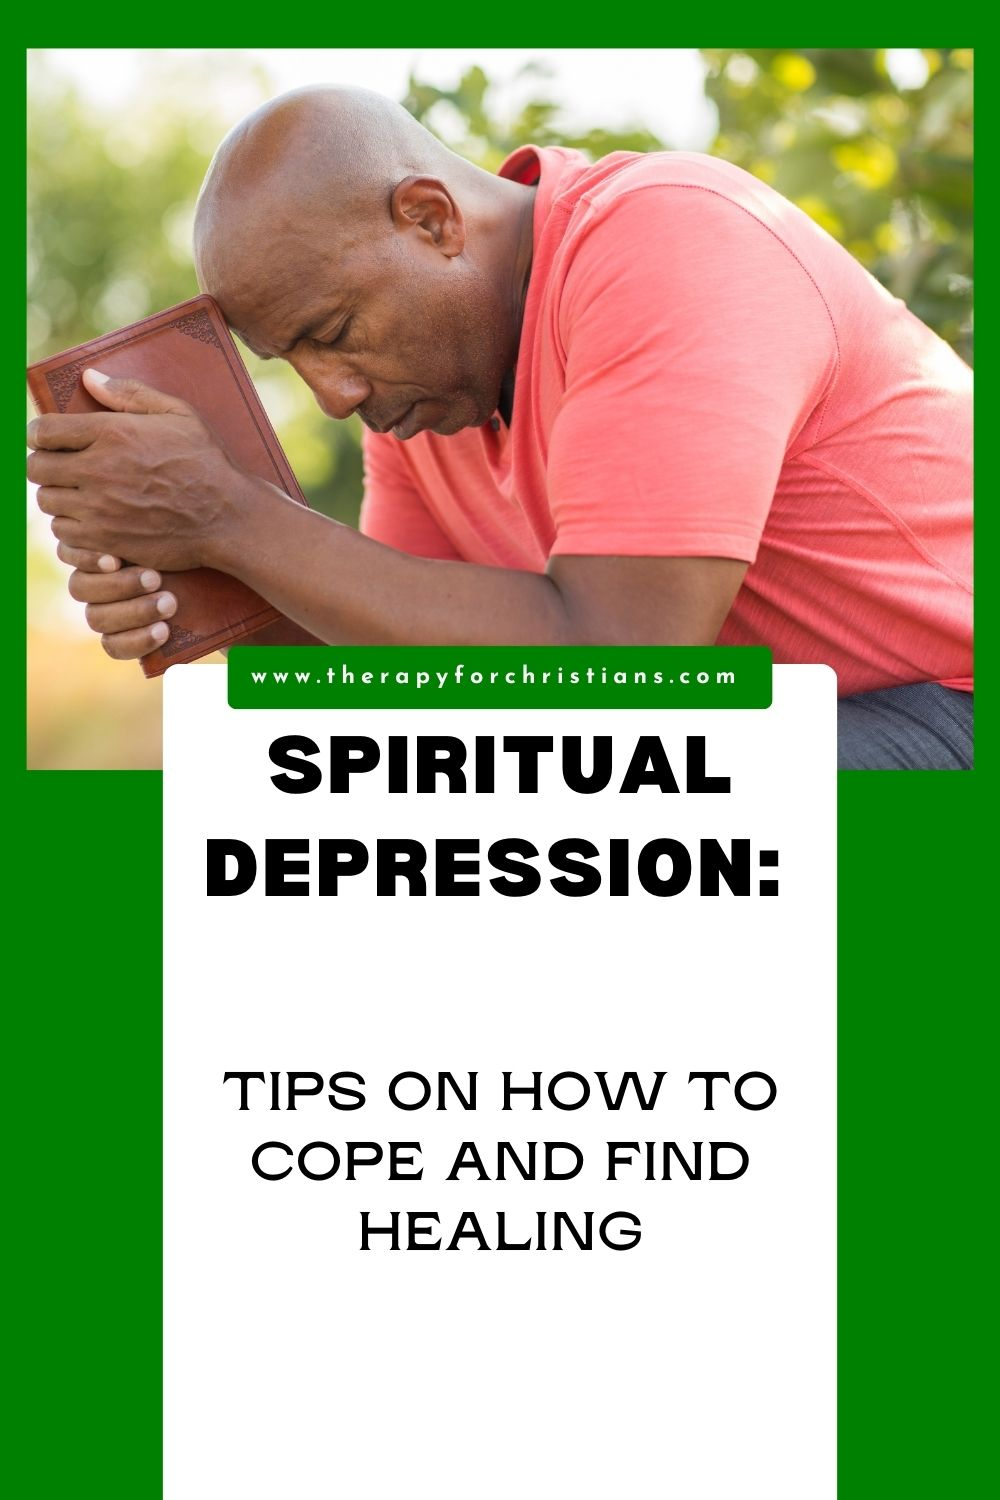 Tips of how to cope and find help for spiritual depression 